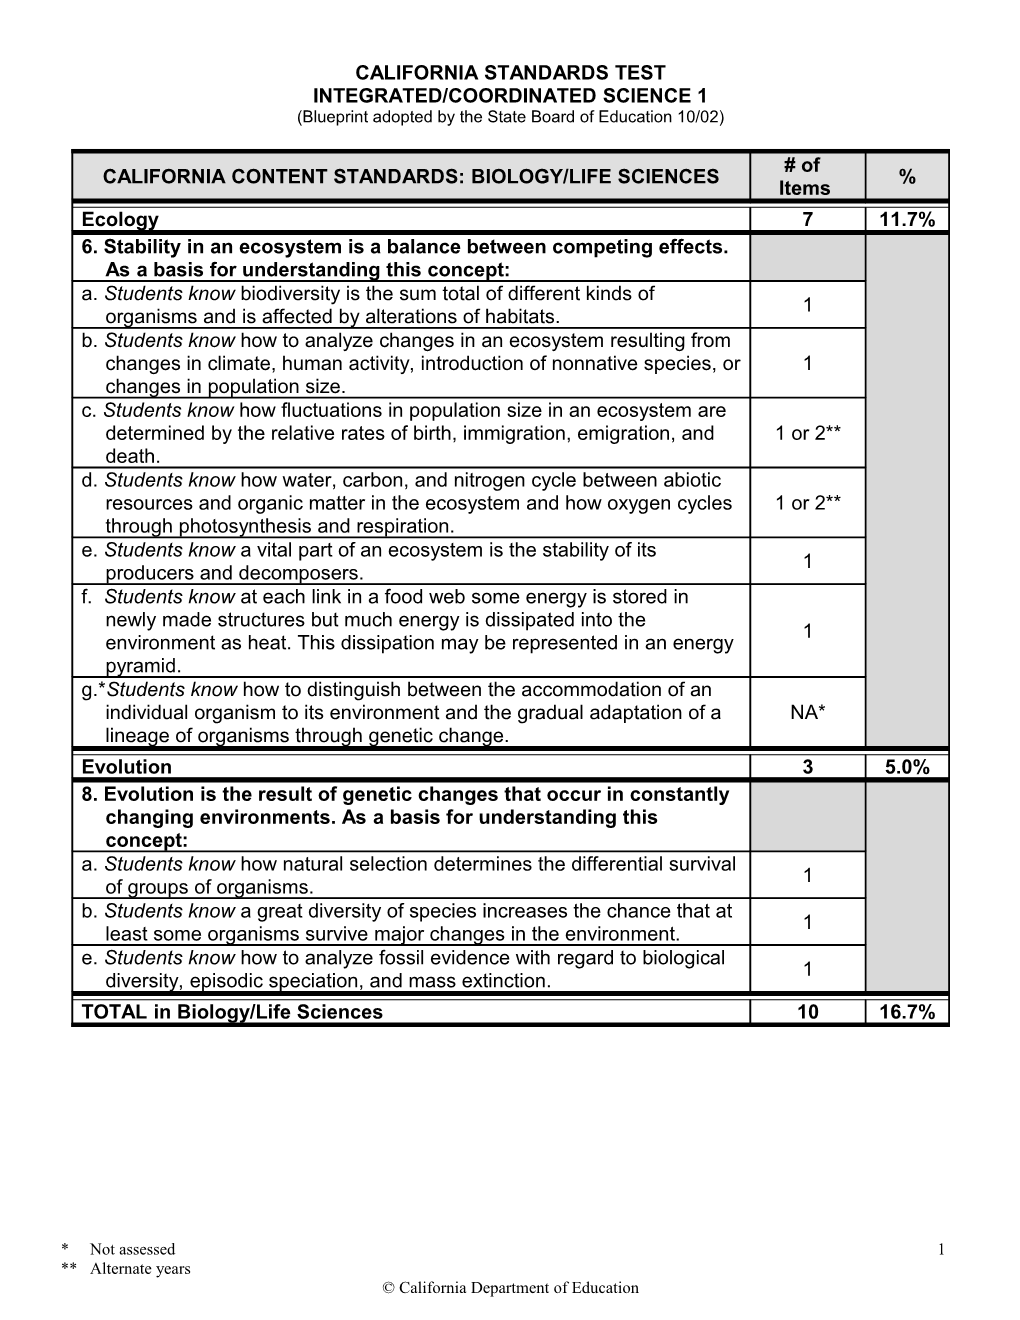 Integrated/Coordinated Science 1 - Standardized Testing and Reporting (CA Dept of Education)